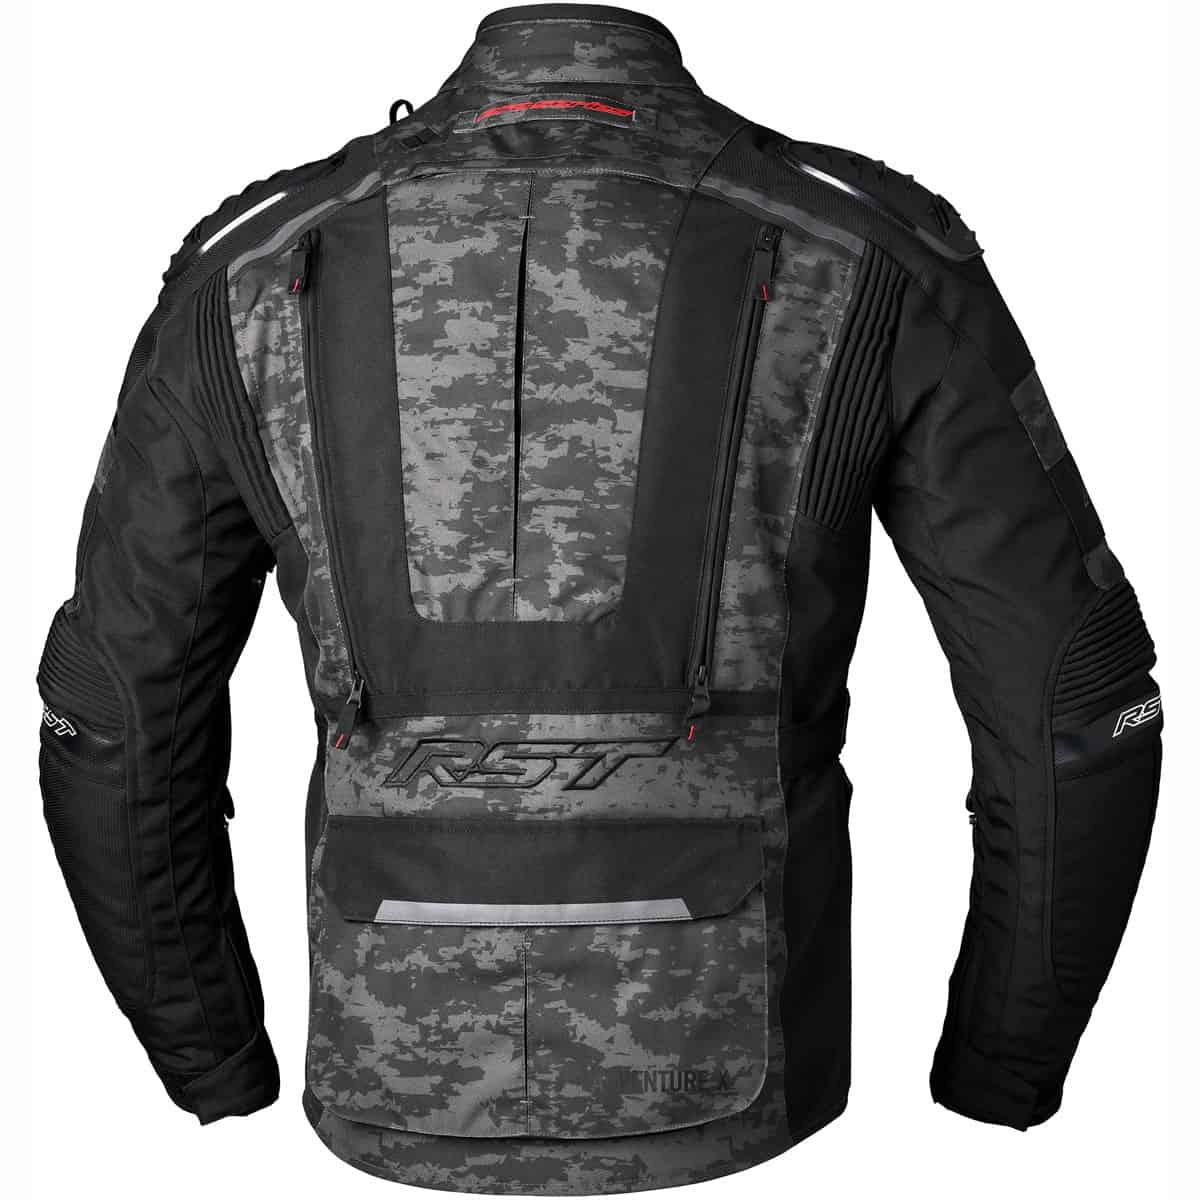 Looking for the ultimate adventure riding experience? Look no further than the RST Pro Series Adventure-X jacket